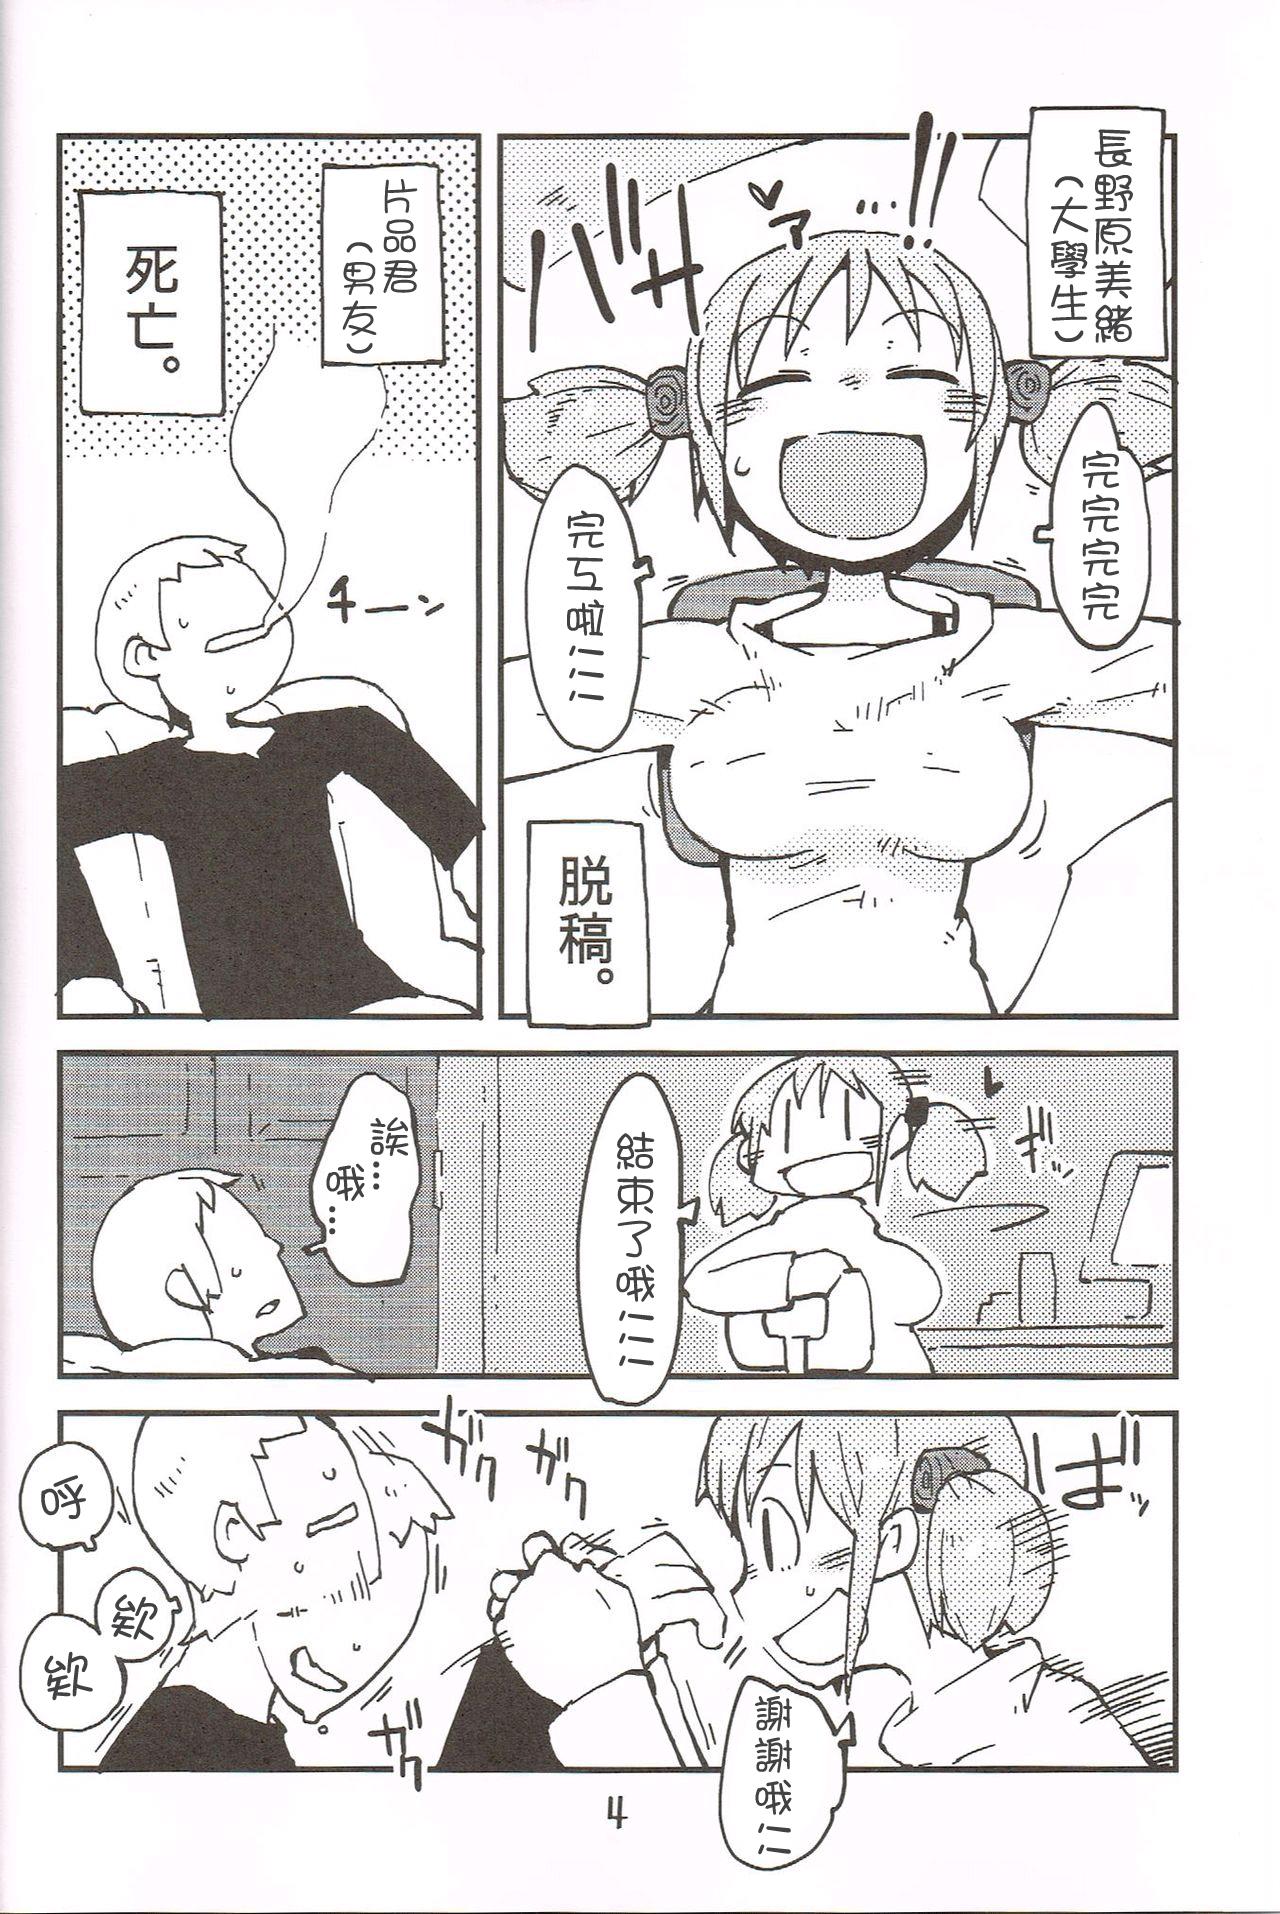 Tinytits Foamy Love For you. - Nichijou Panty - Page 4